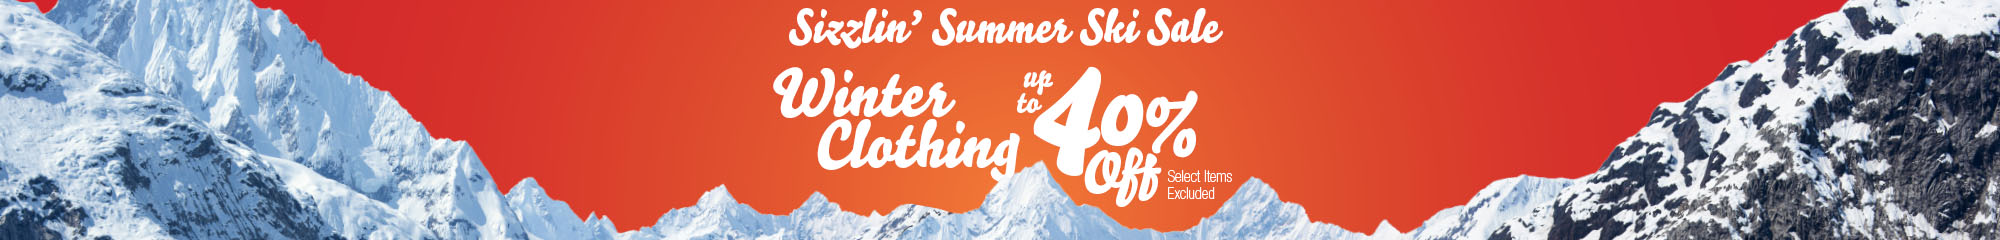 Winter Clothing up to 40% Off